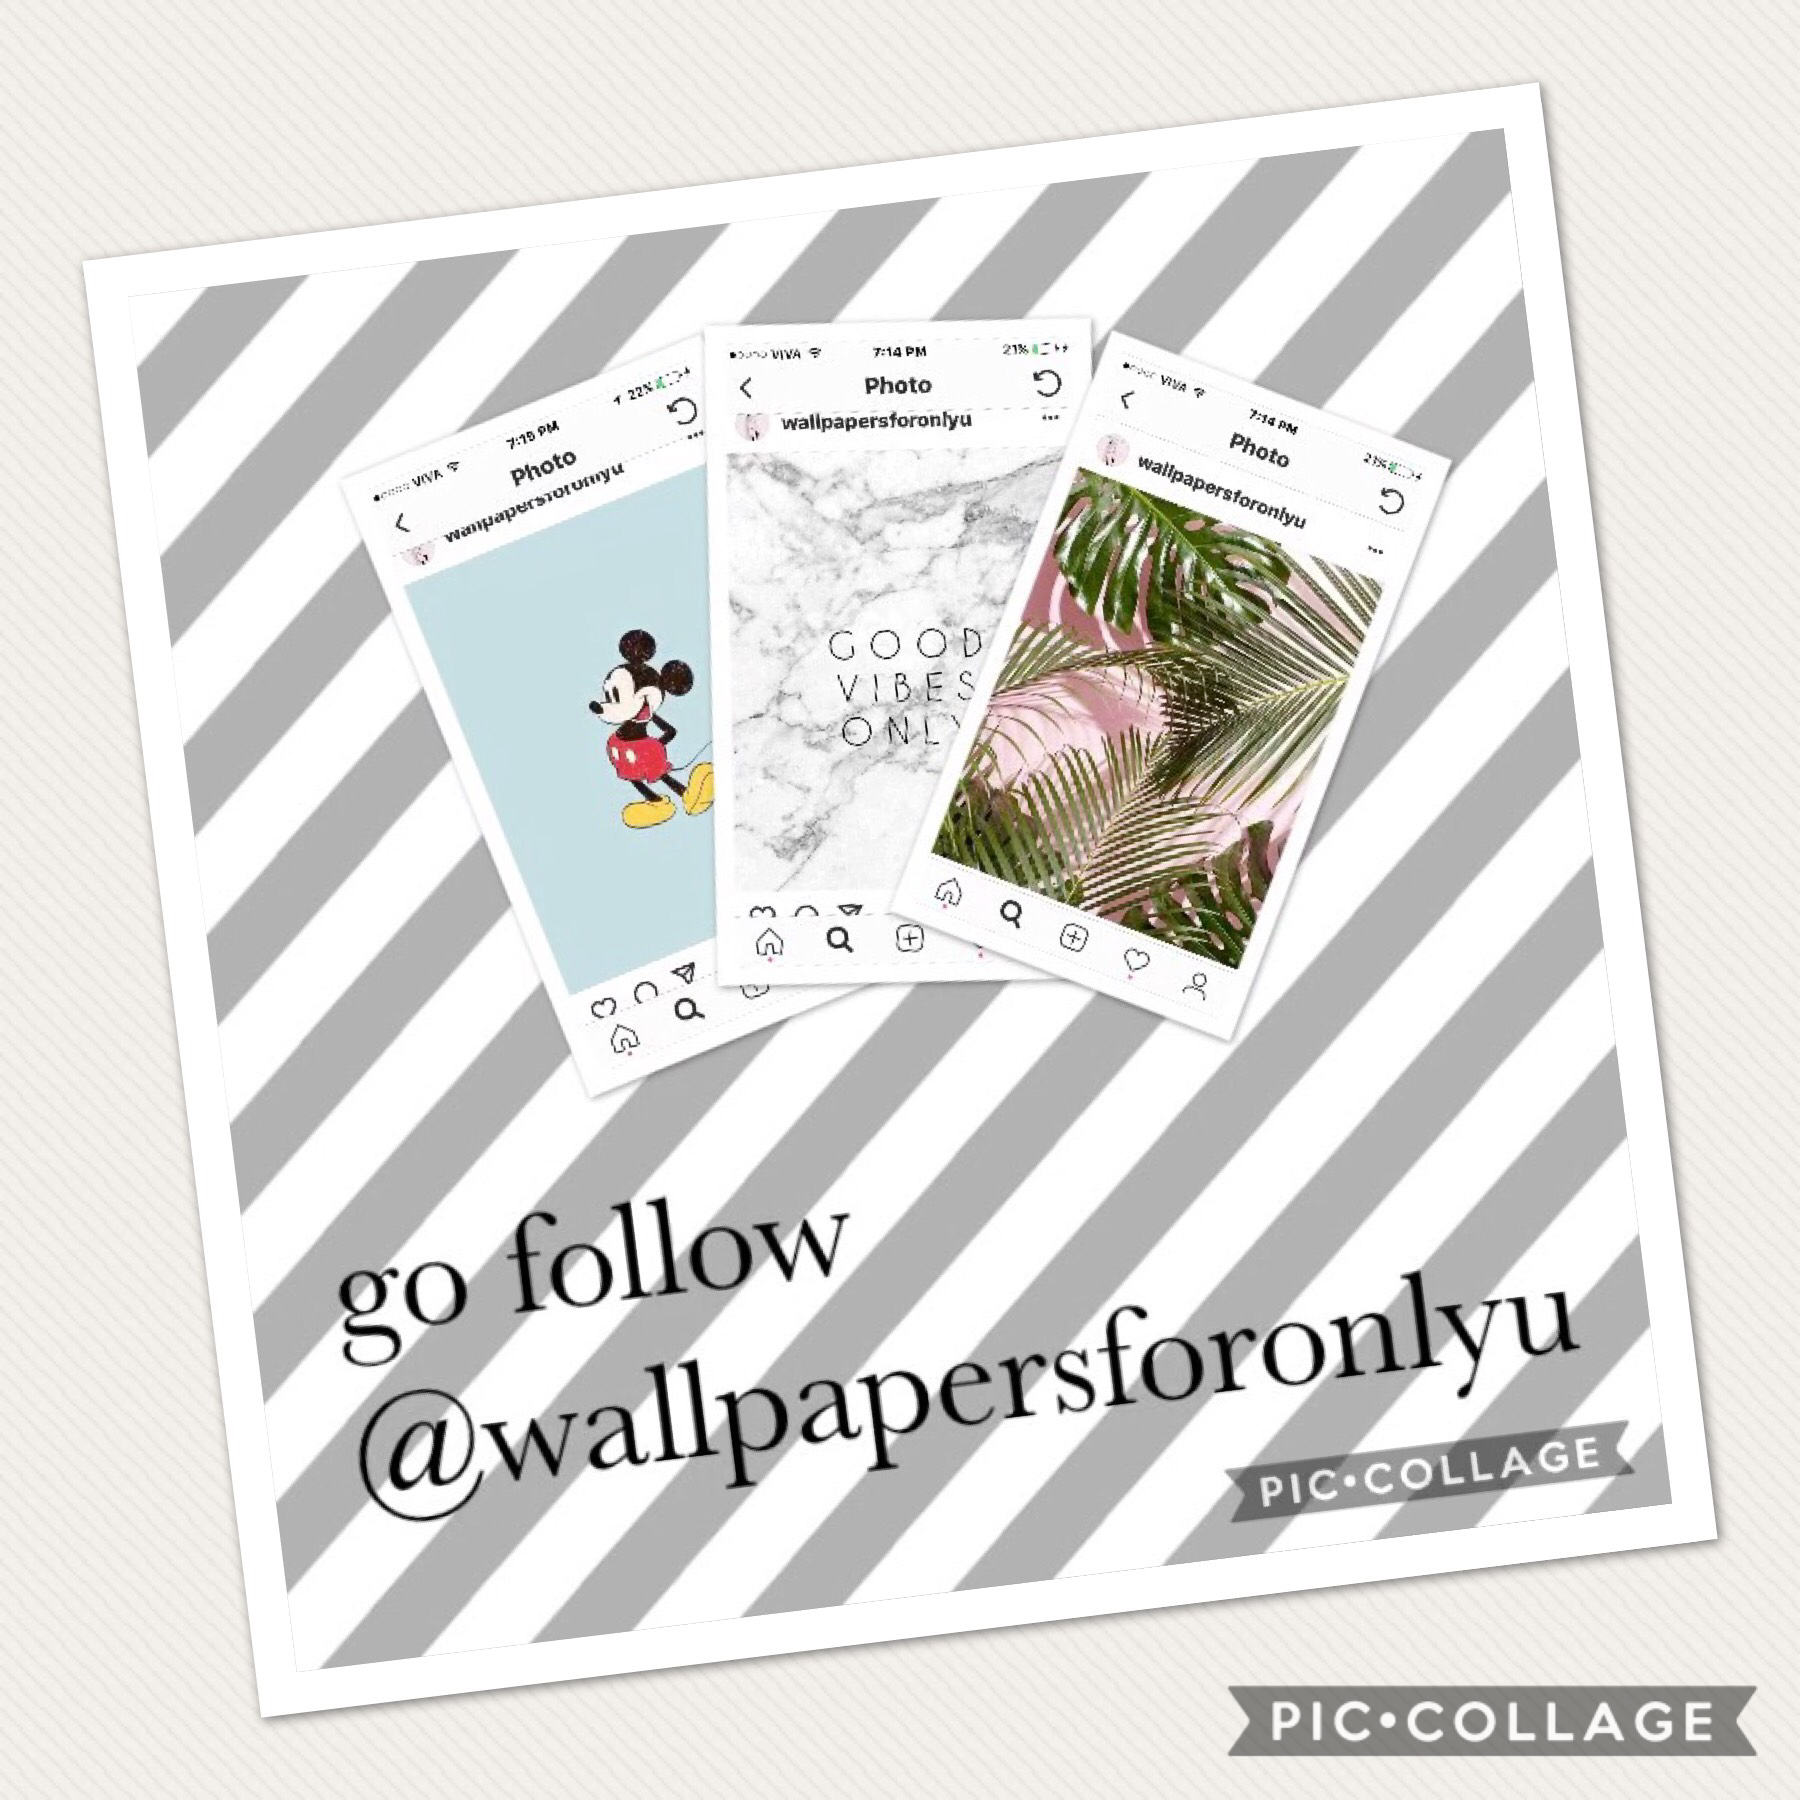 First post on PicCollage!